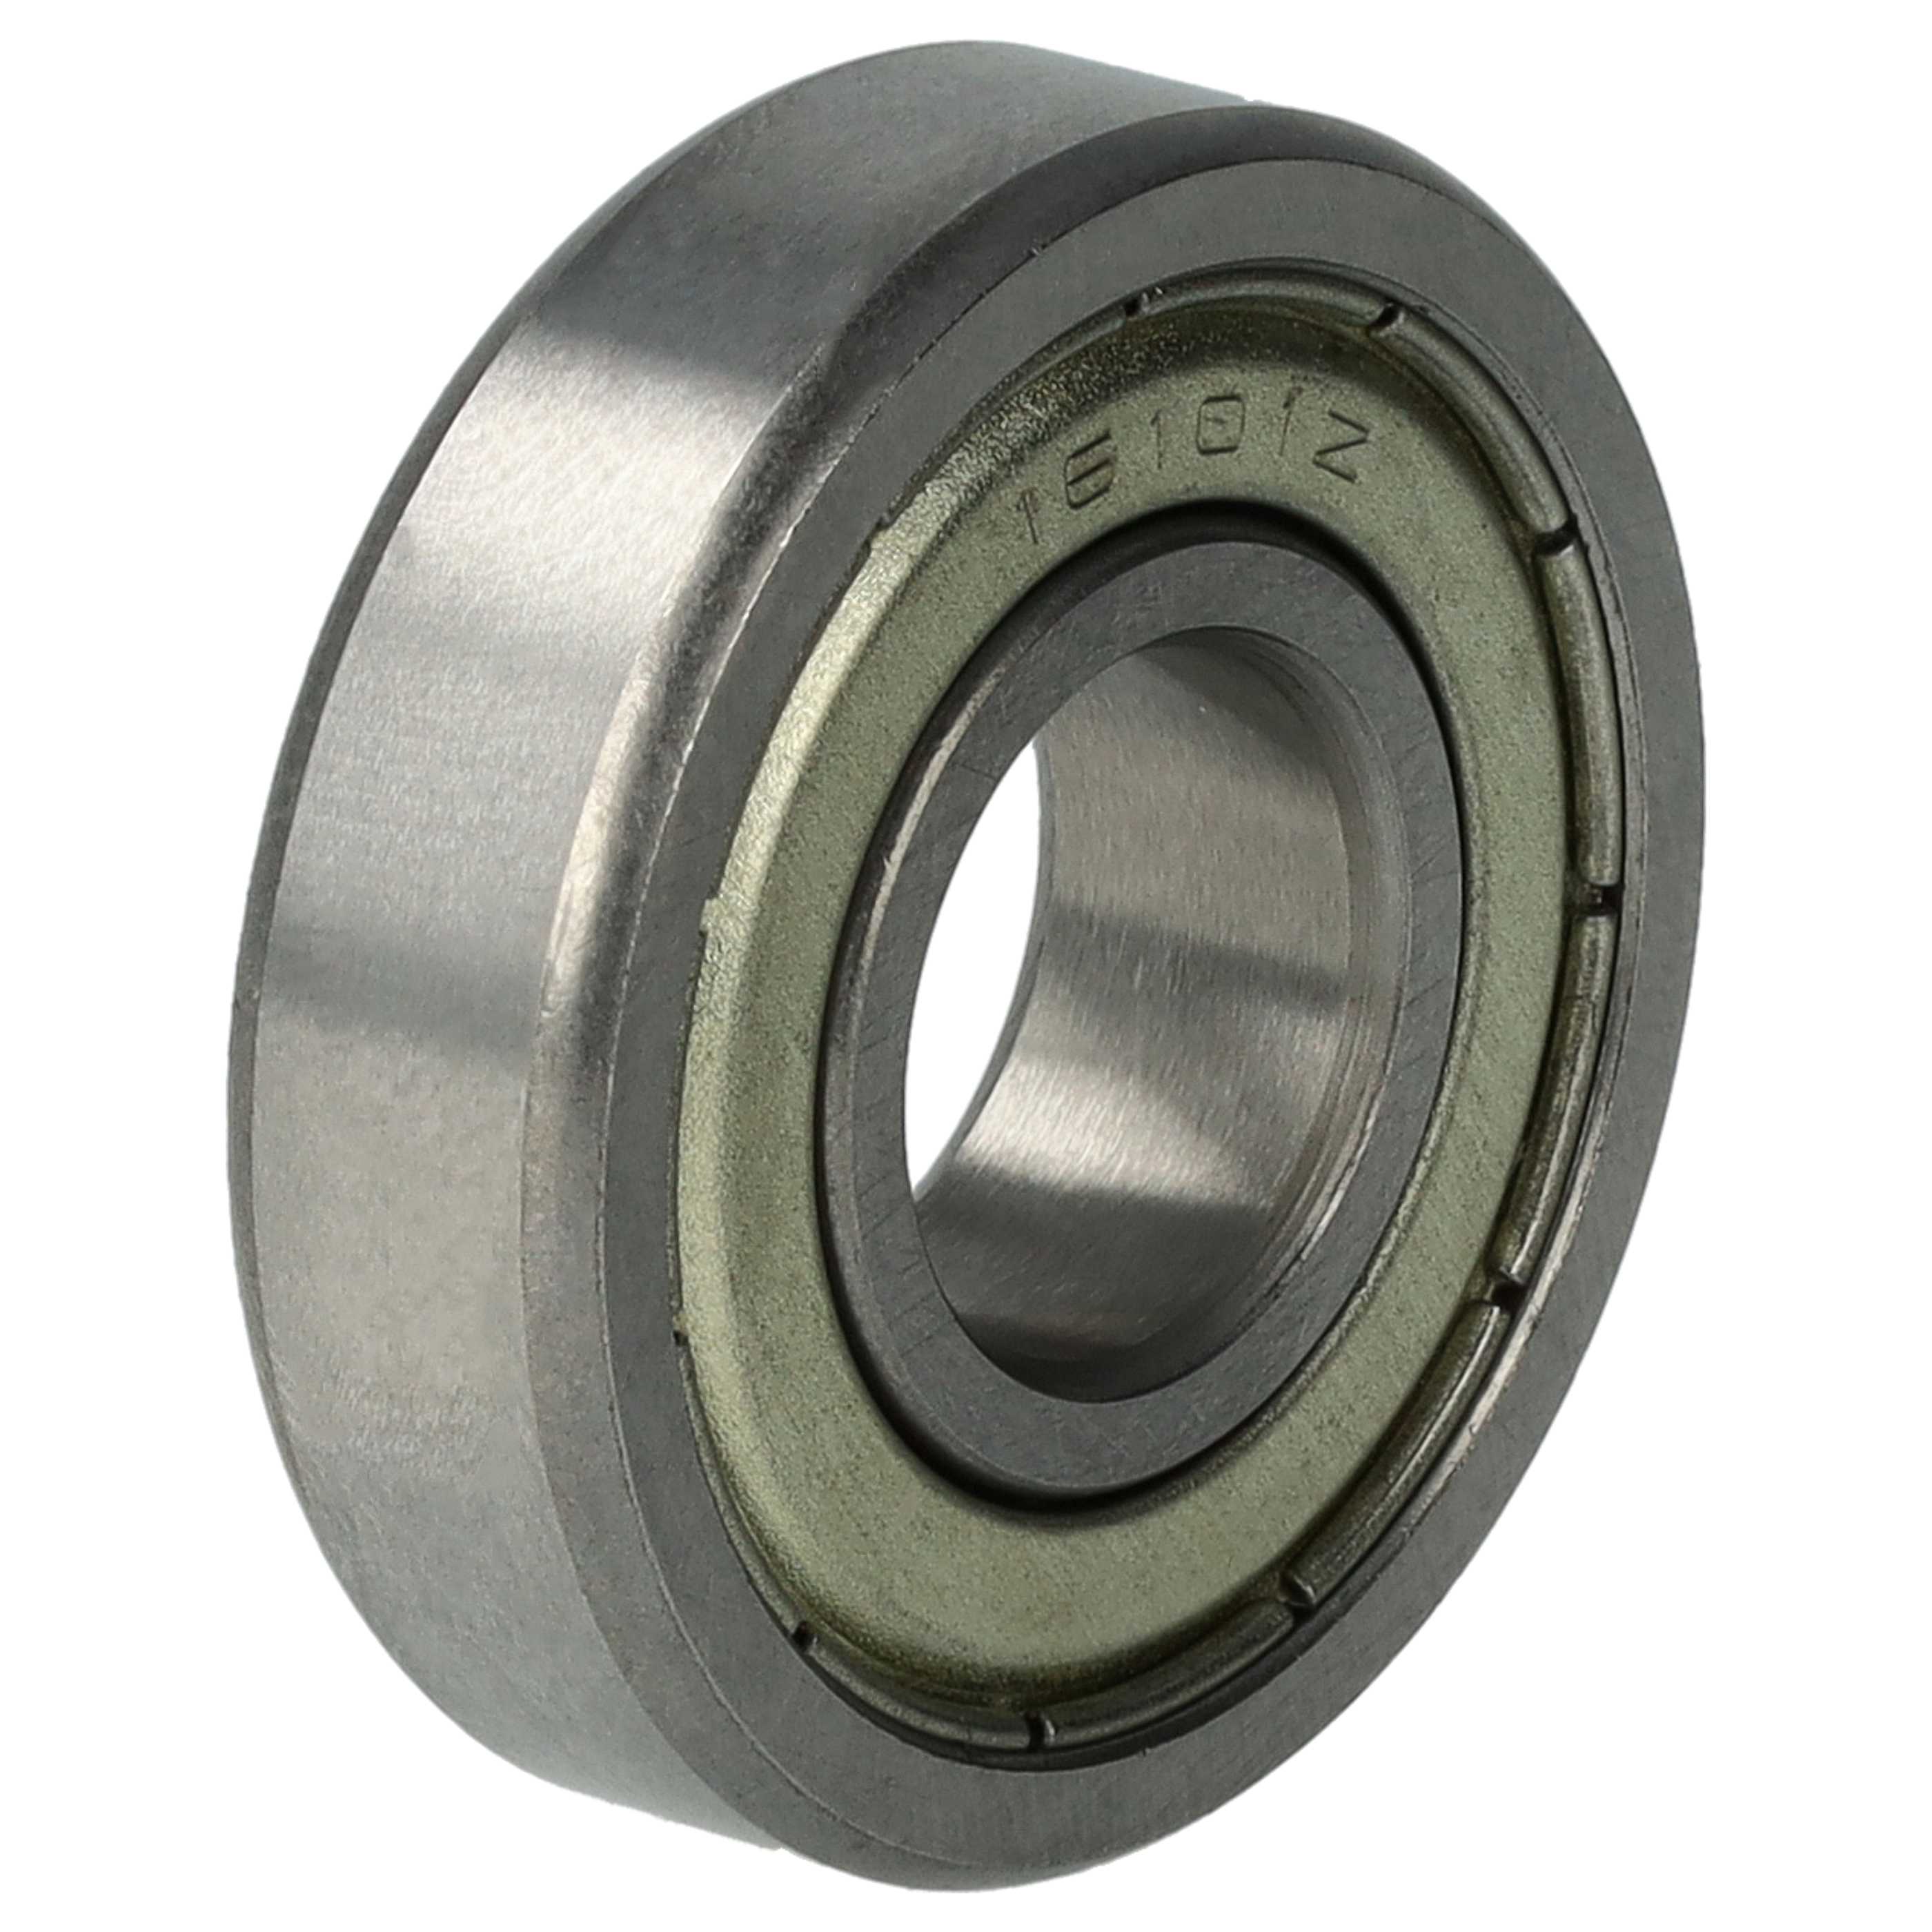 Deep Groove Ball Bearing suitable for Bigshot Sizzix Stamping Machines, Bicycles, Tools, Washing Machines etc.